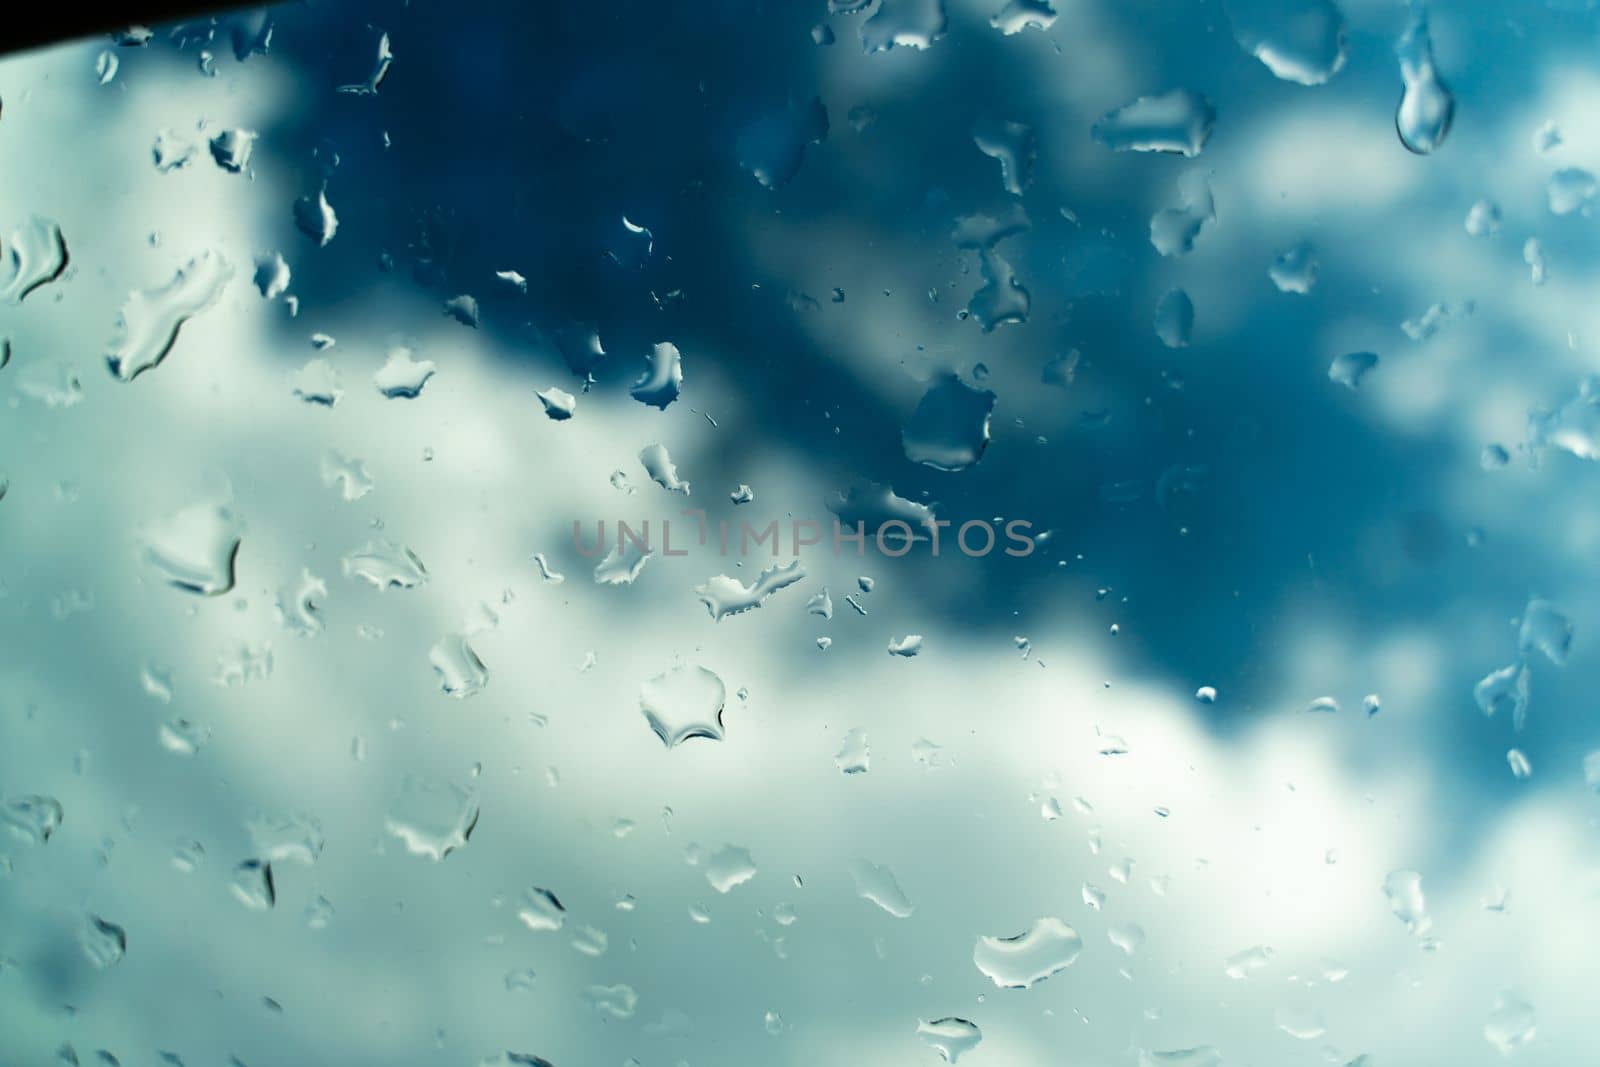 Raindrops on glass against blue sky. Window view background screensaver. Place for text banner.